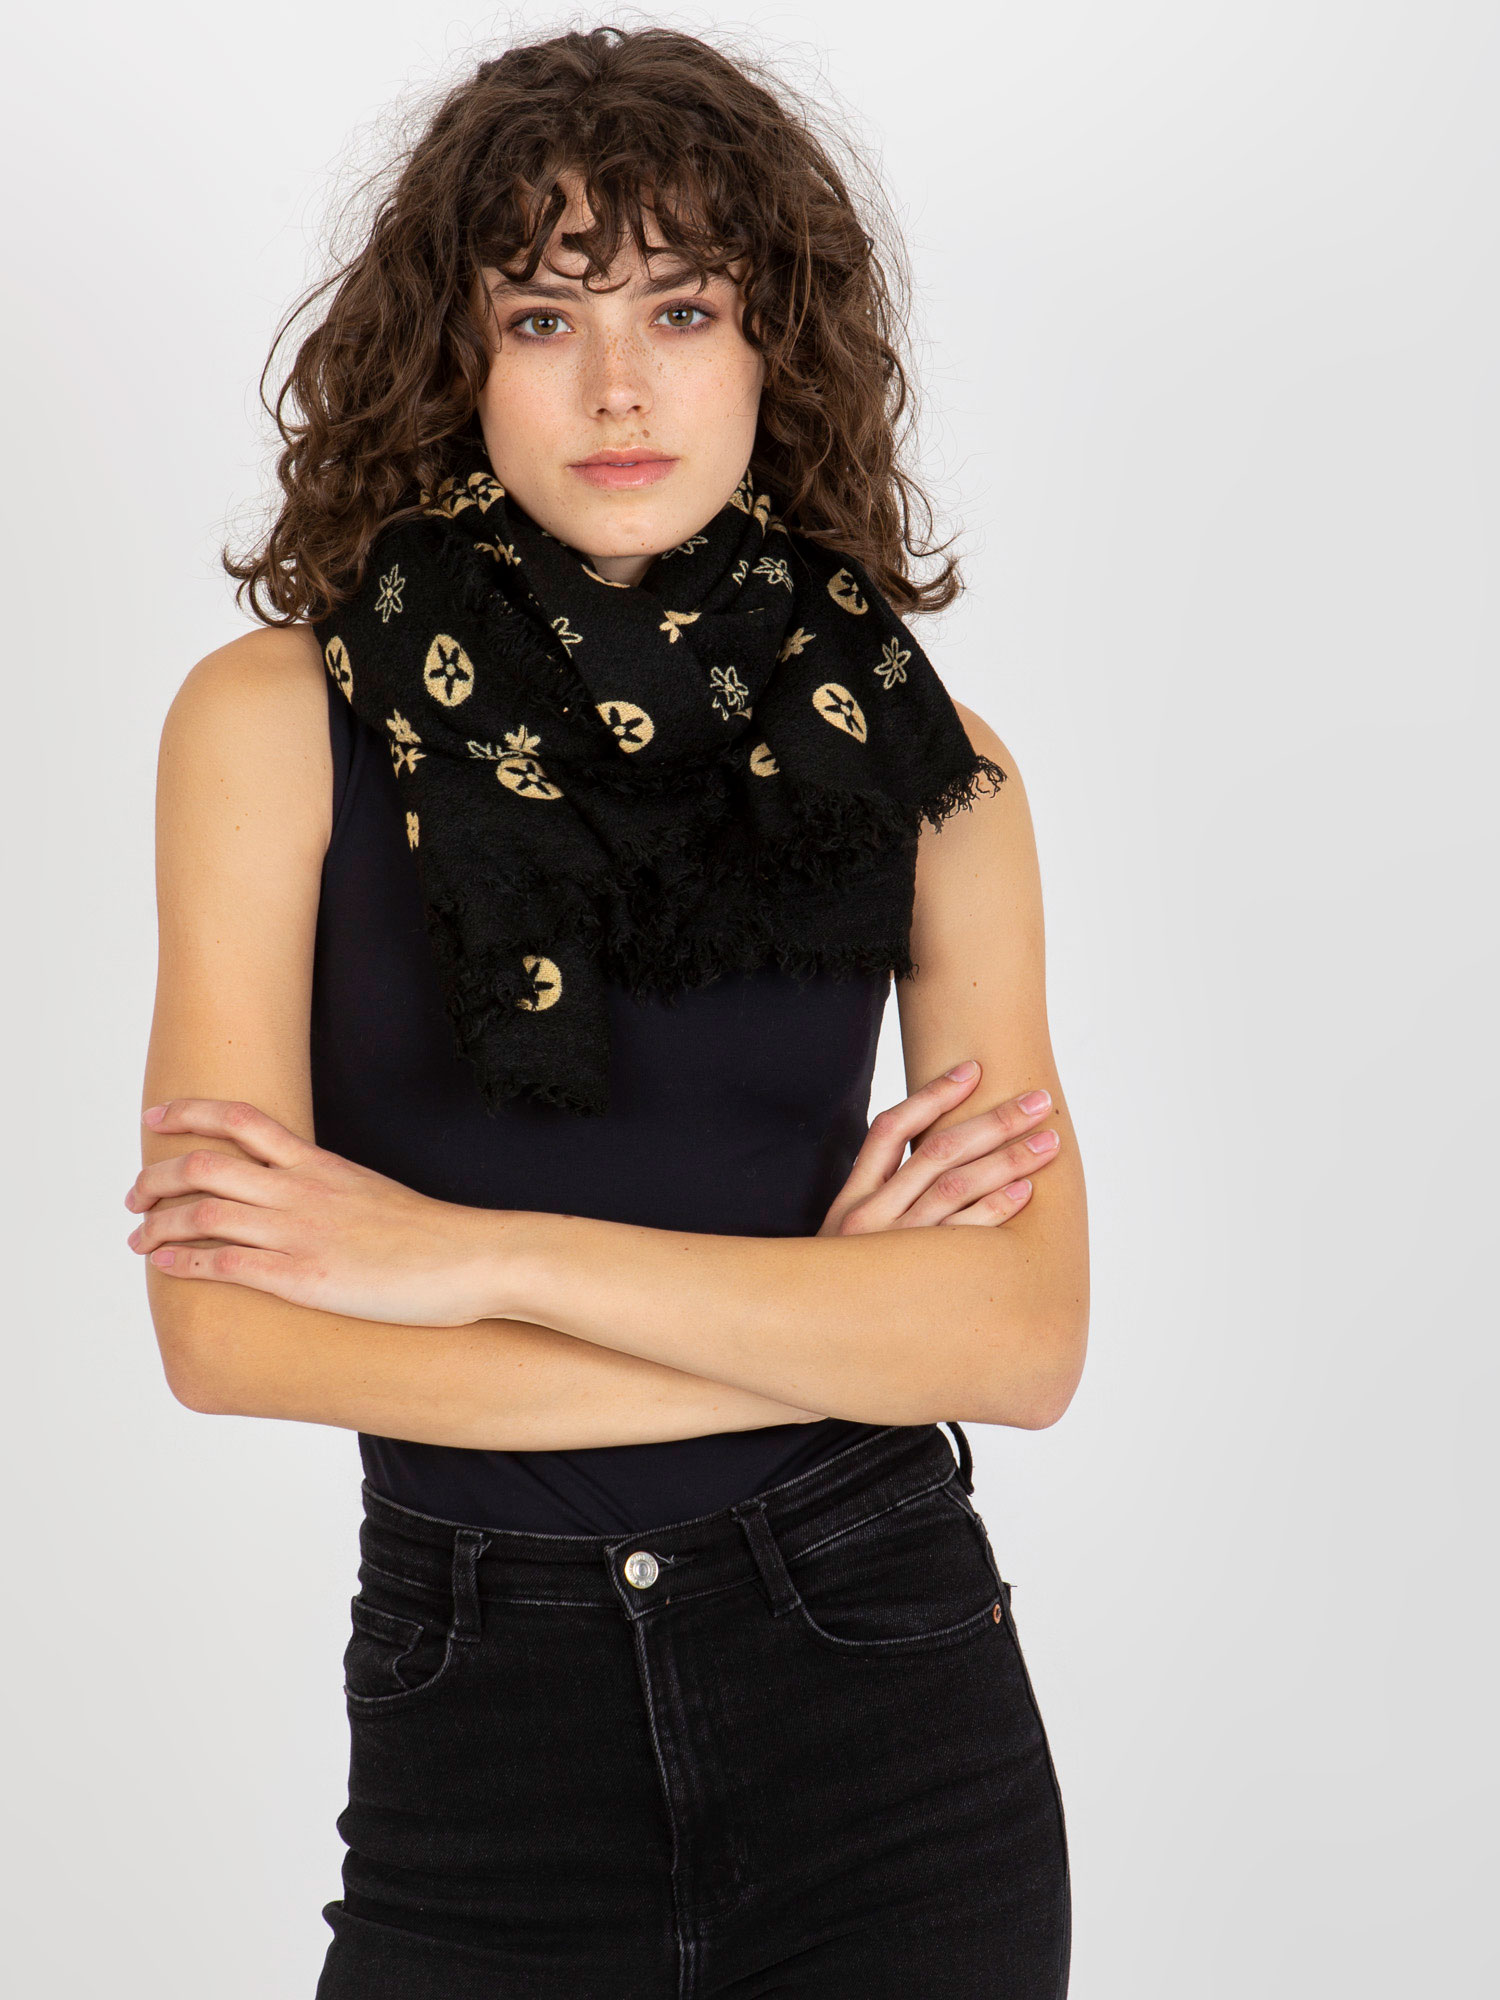 Women's scarf with print - black